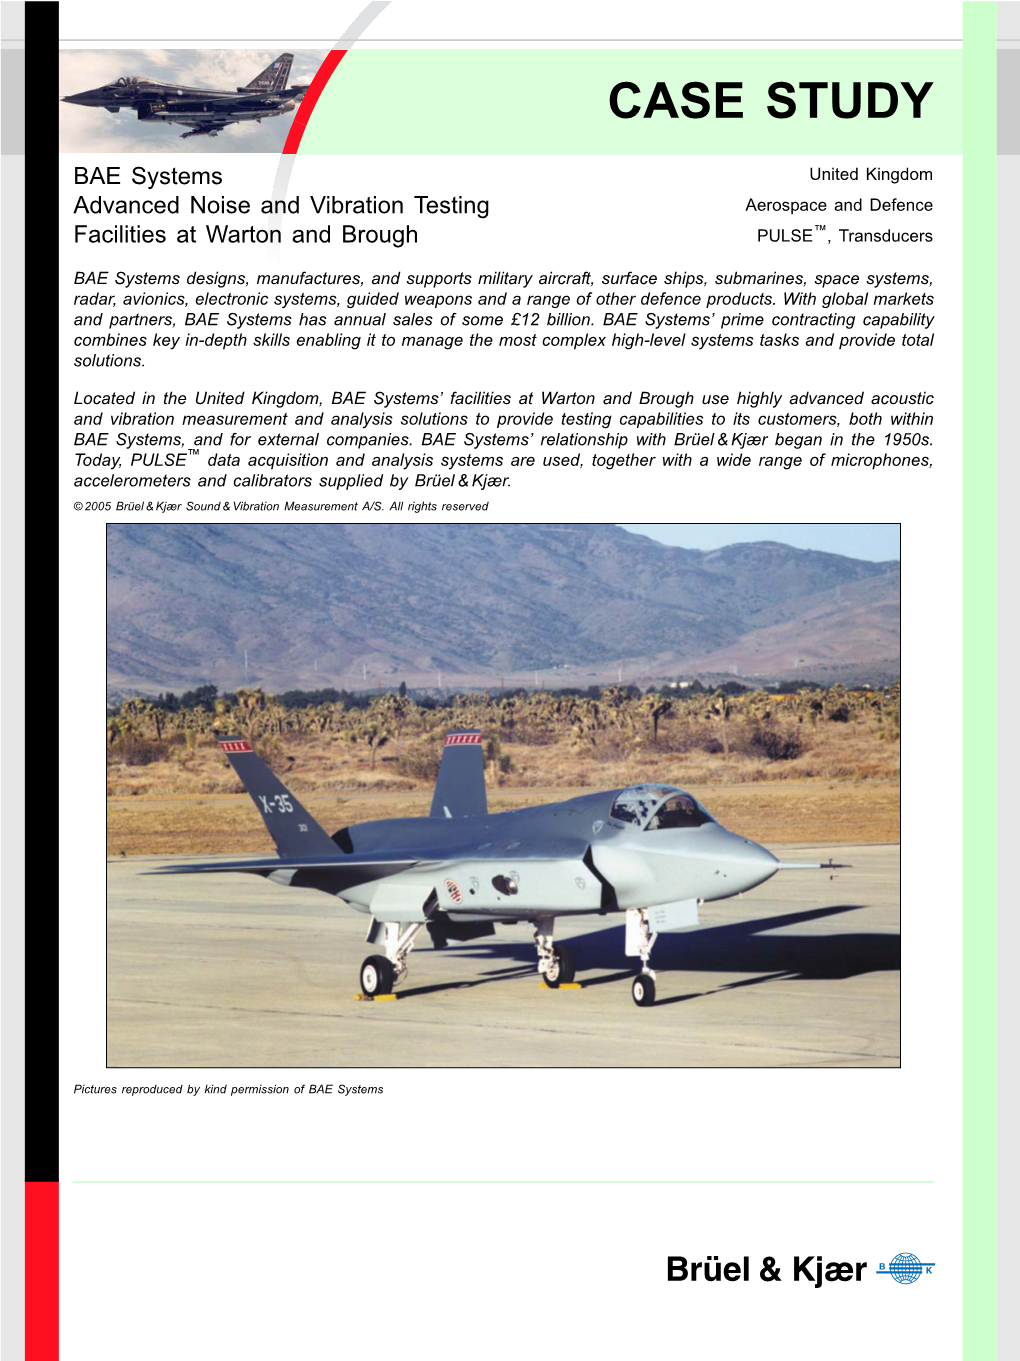 Case Study: BAE Systems, Advanced Noise and Vibration Testing,Facilities